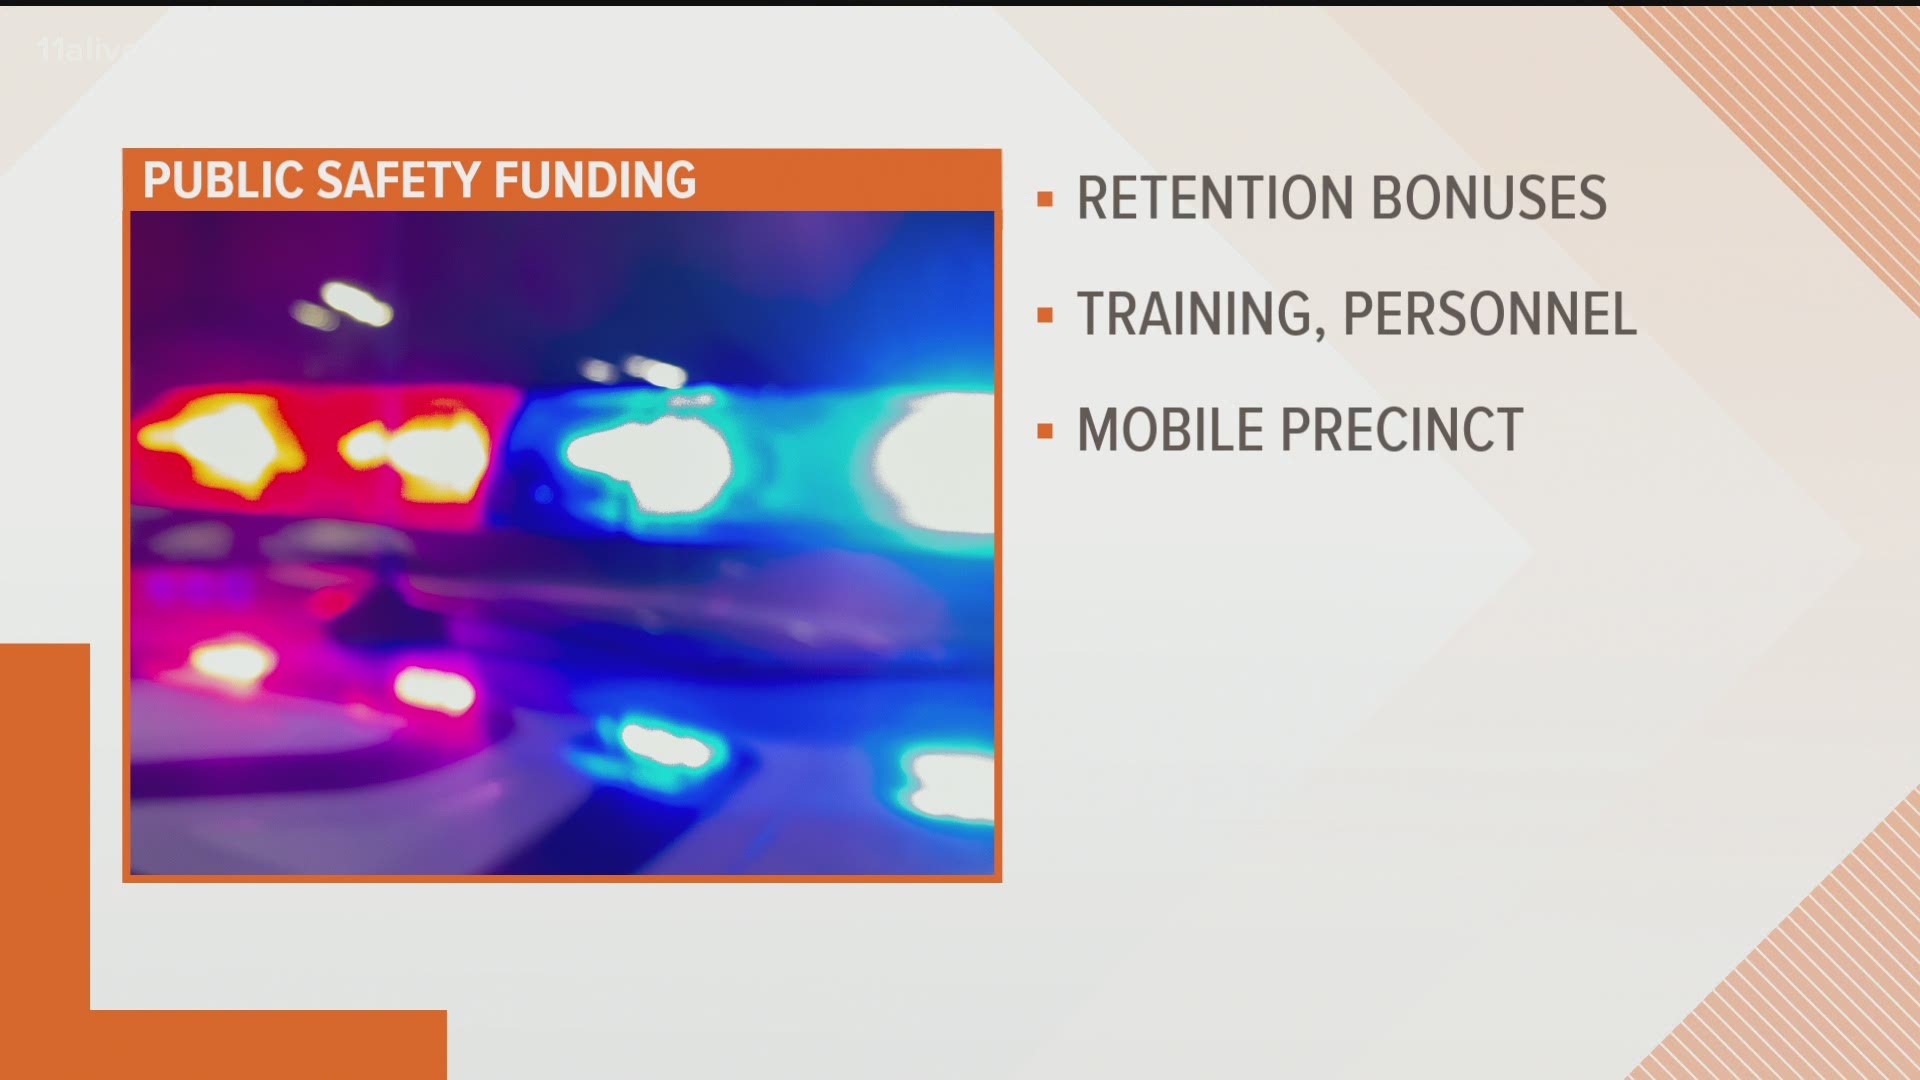 The county announced the plan includes a $3,000 bonus for public safety employees.